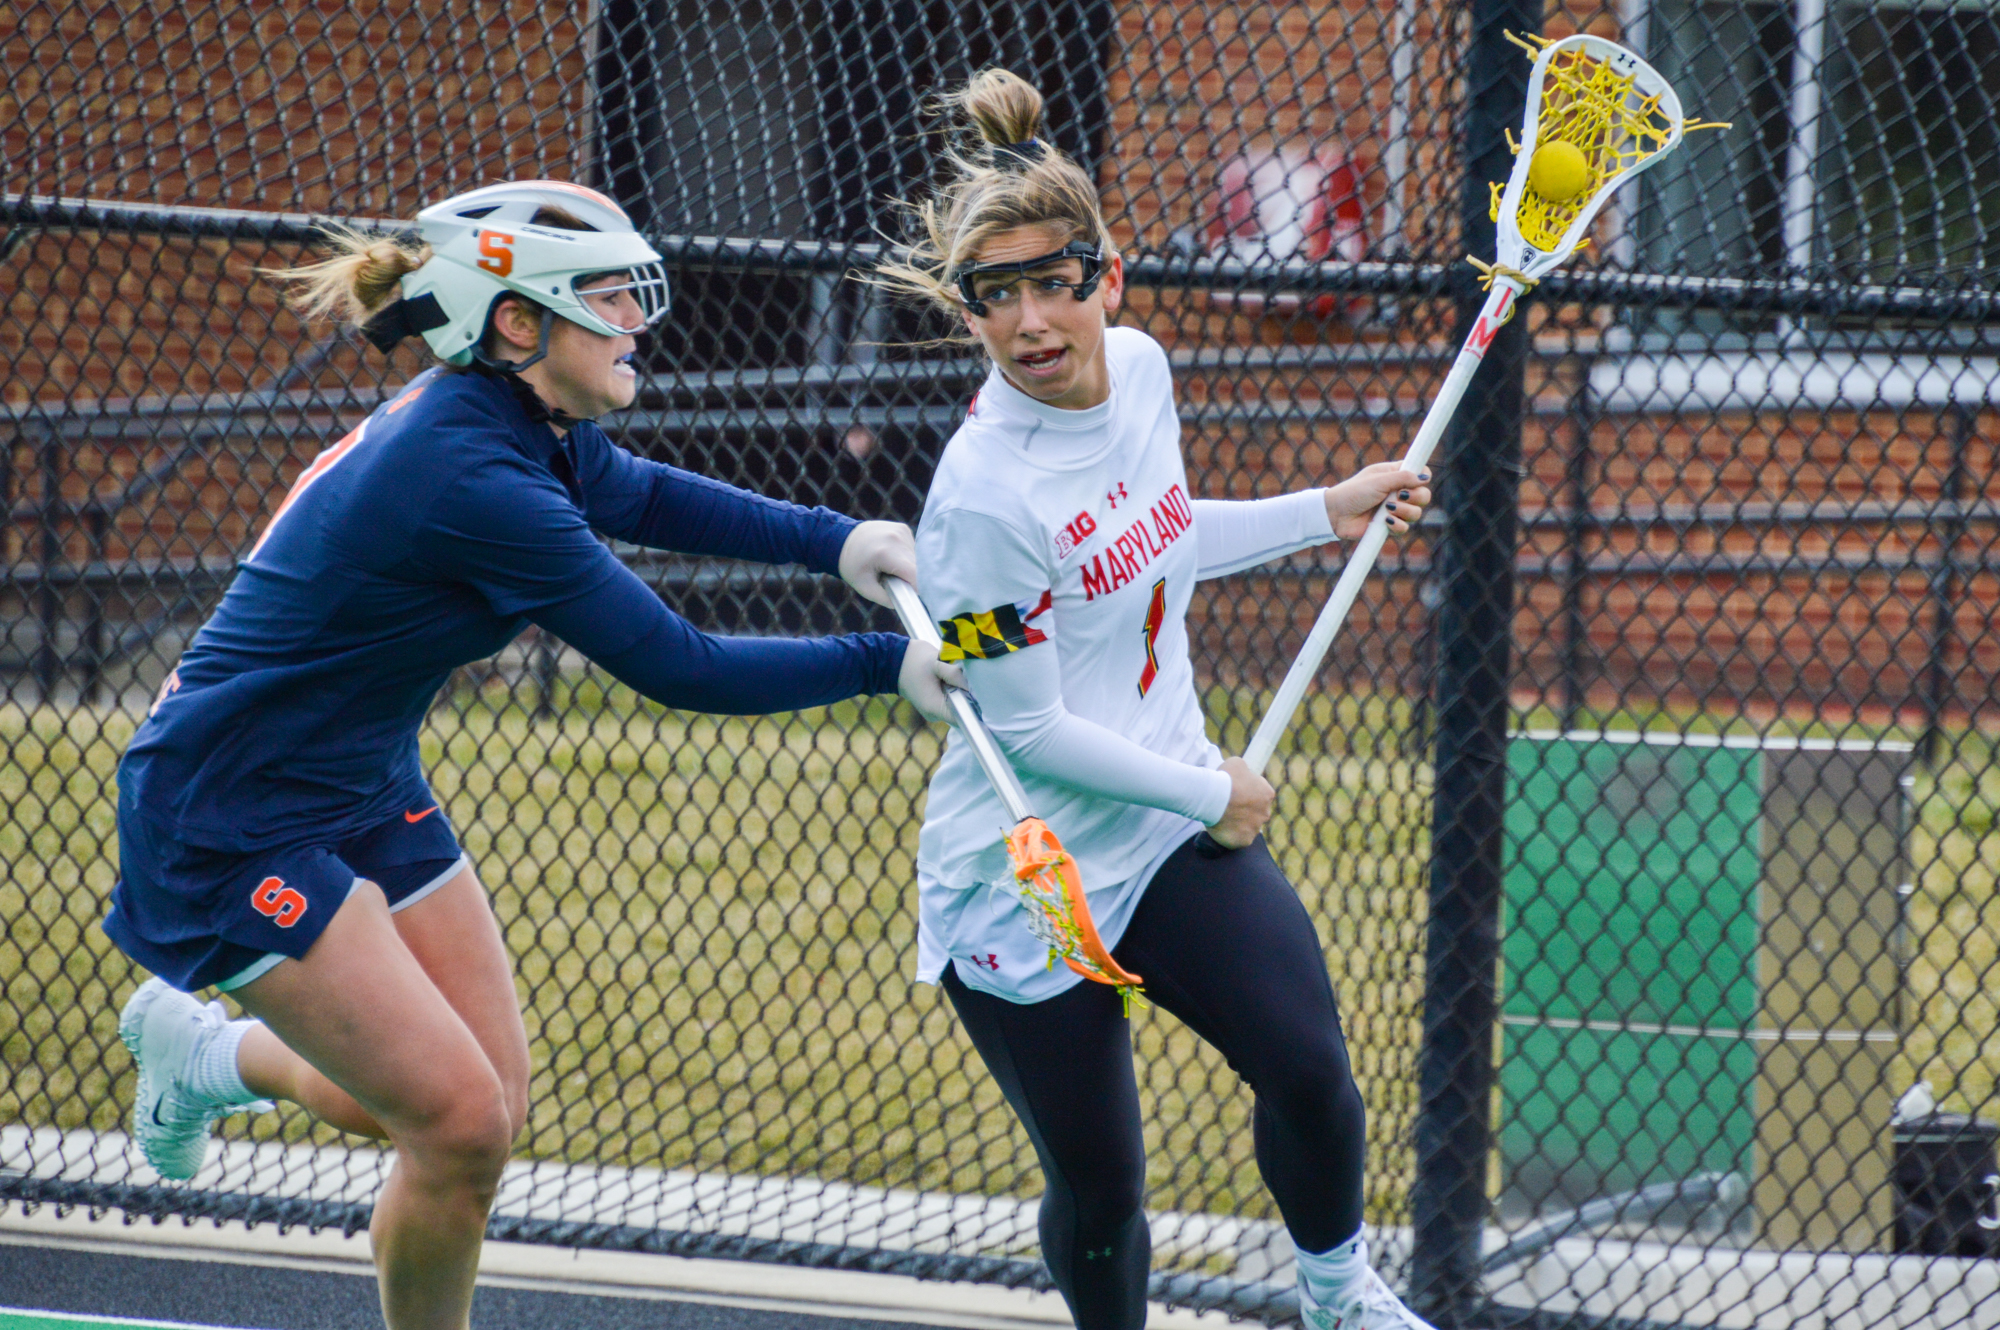 Woman in a white jersey with a lacrosse stick and ball running past a woman in a blue jersey with a lacrosse stick